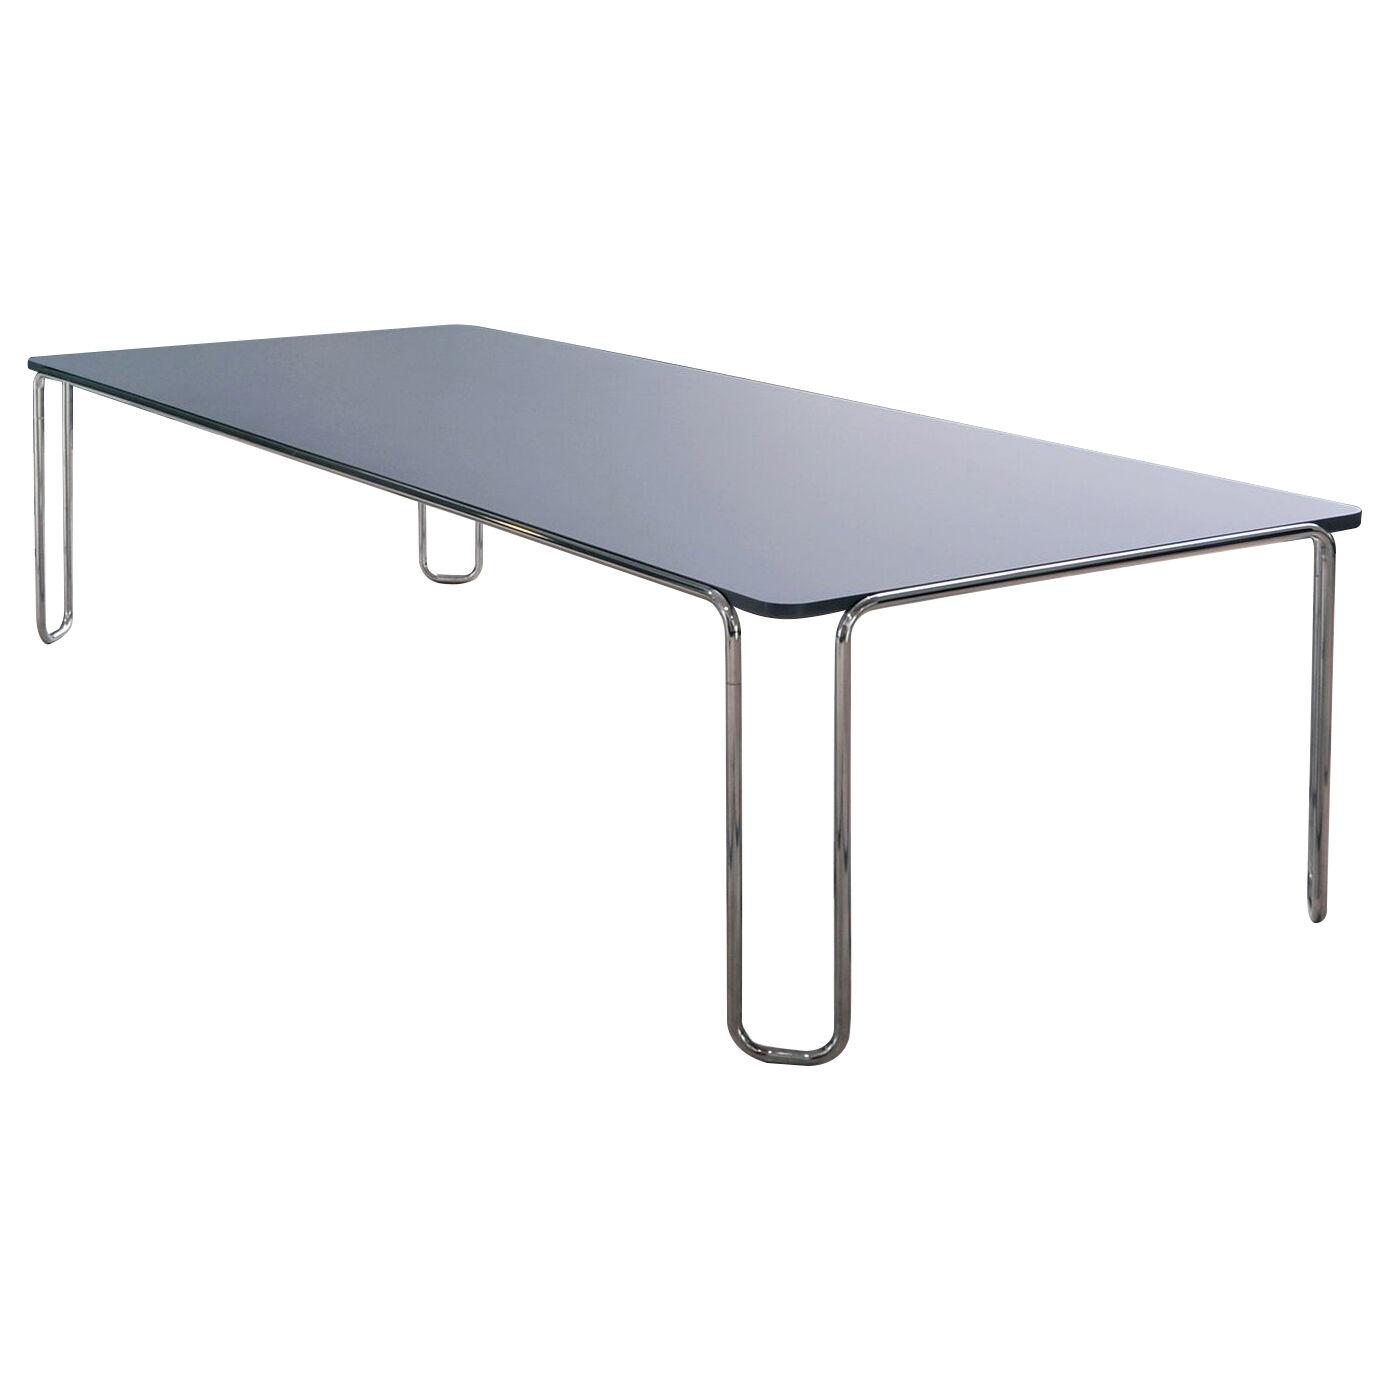 Large modernist ultra-thin tubular steel table by GMD Berlin